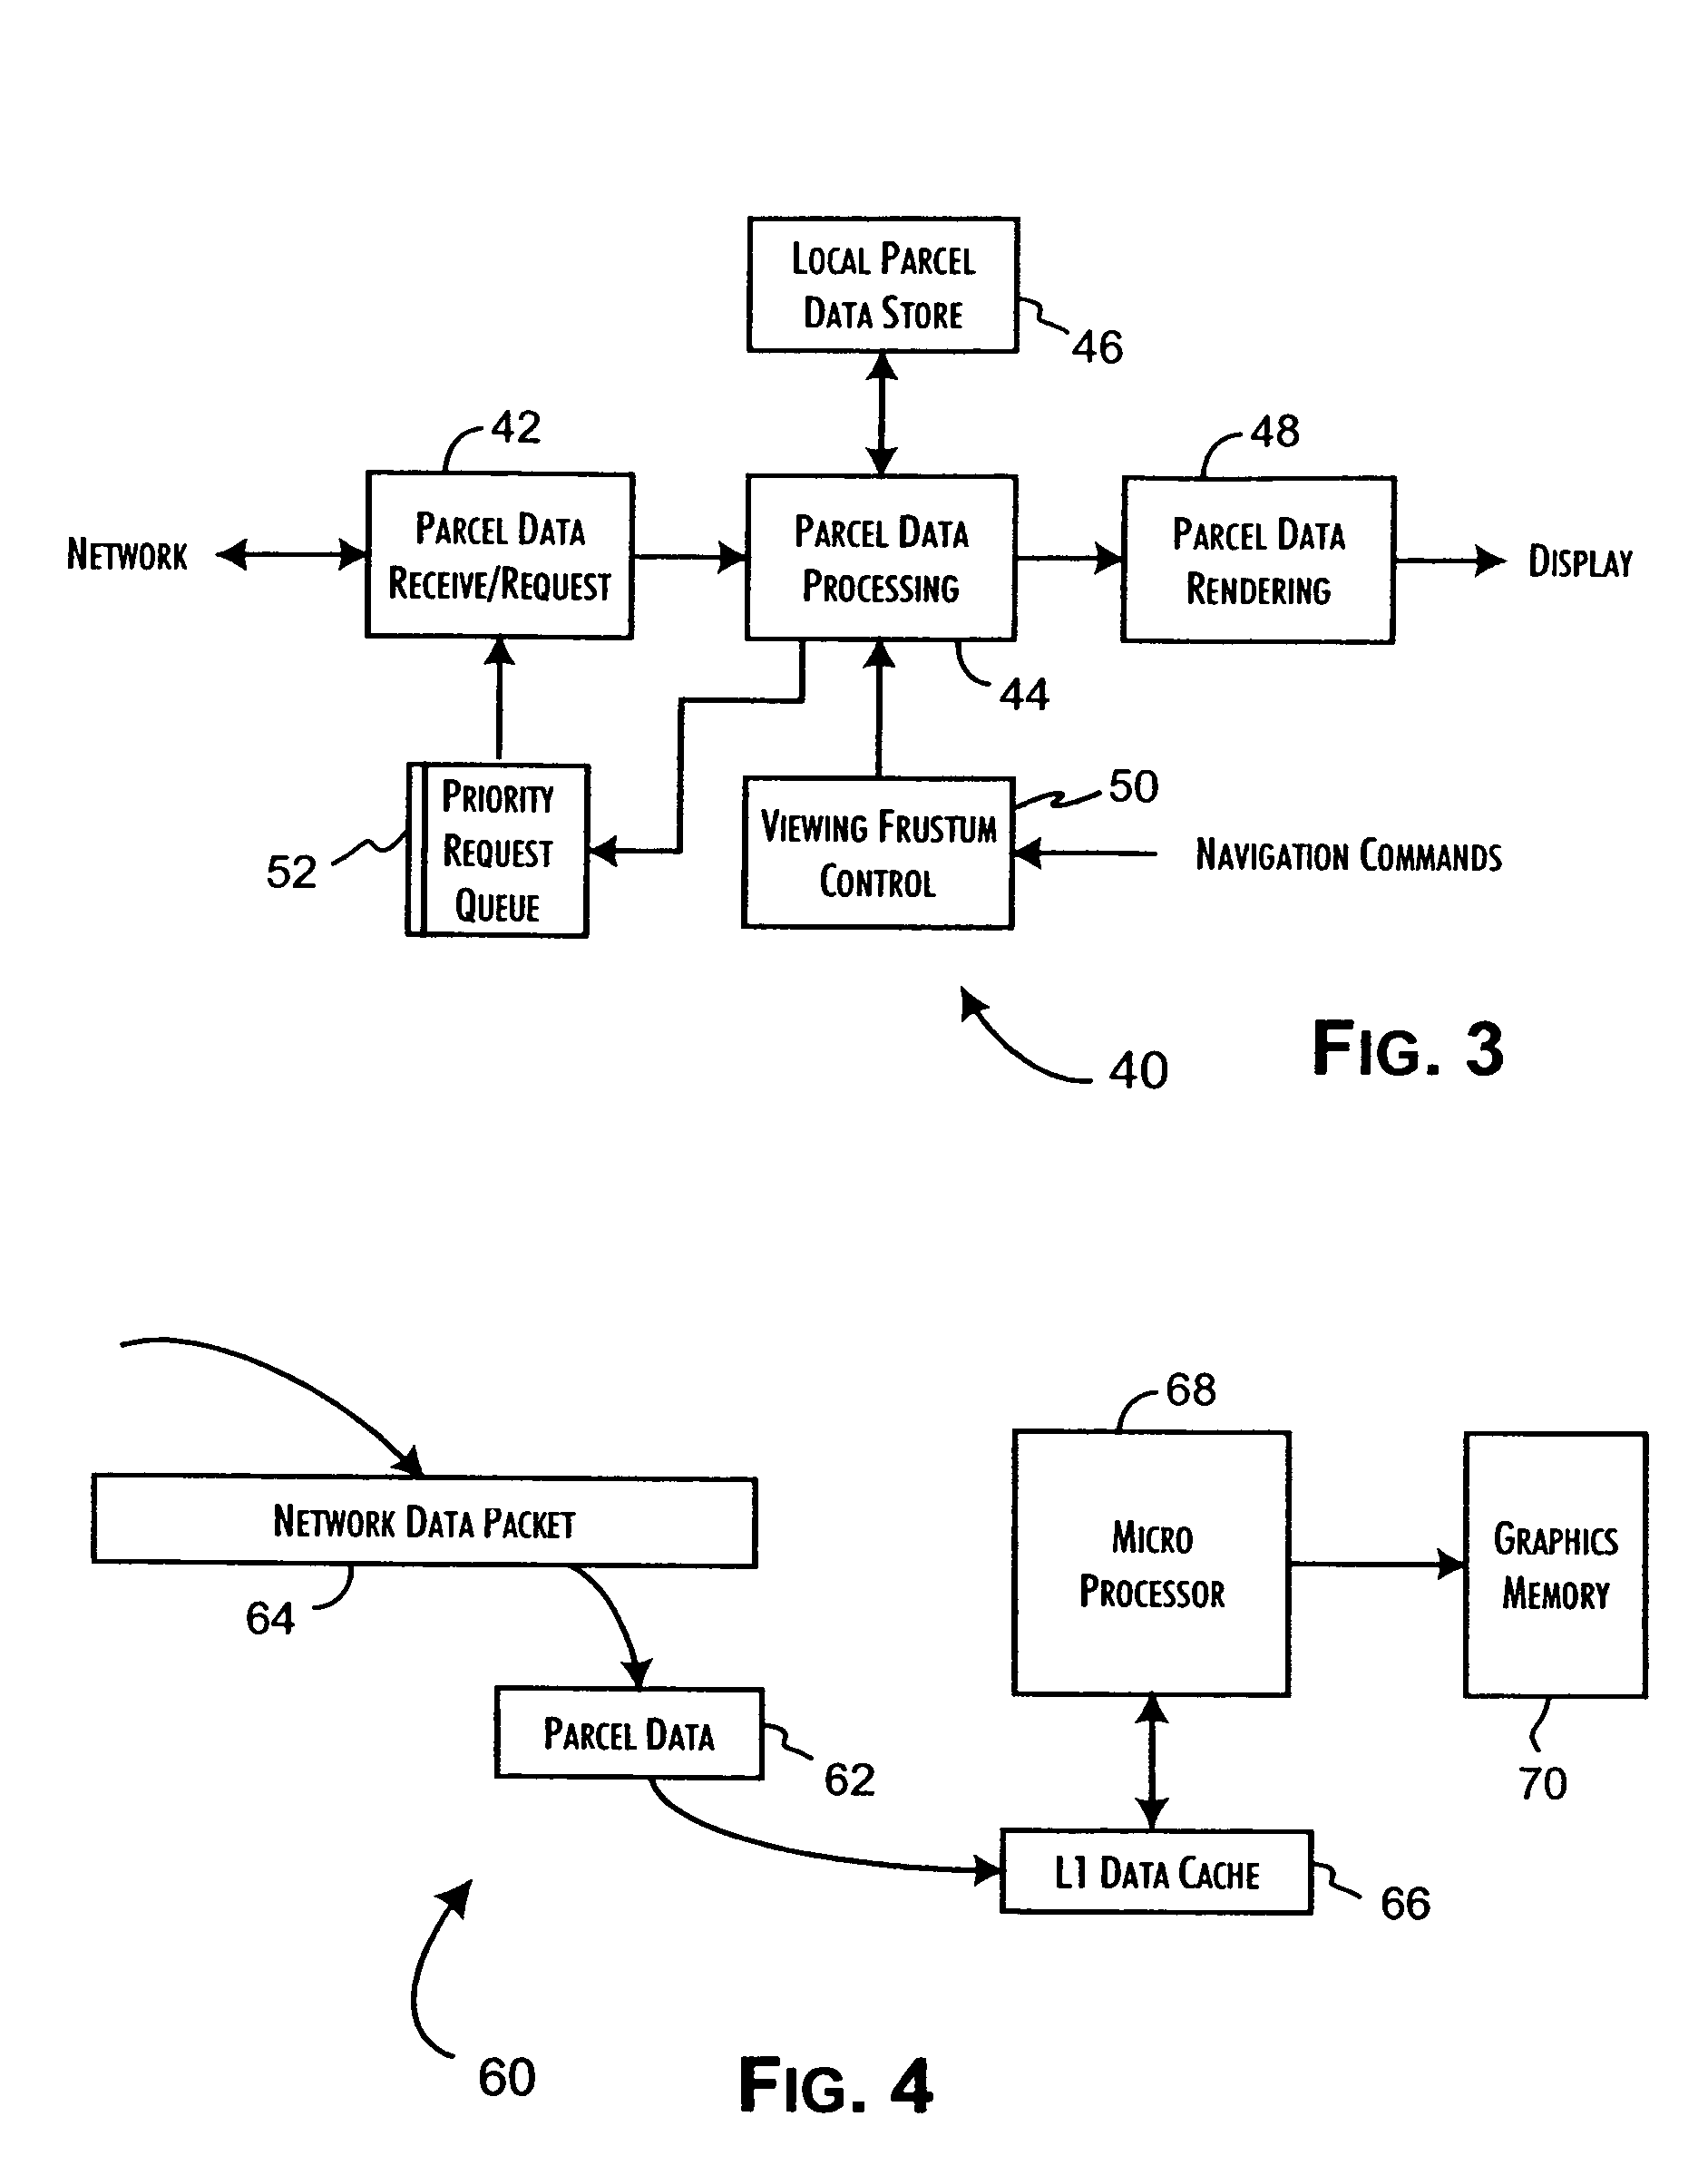 System and methods for network image delivery with dynamic viewing frustum optimized for limited bandwidth communication channels